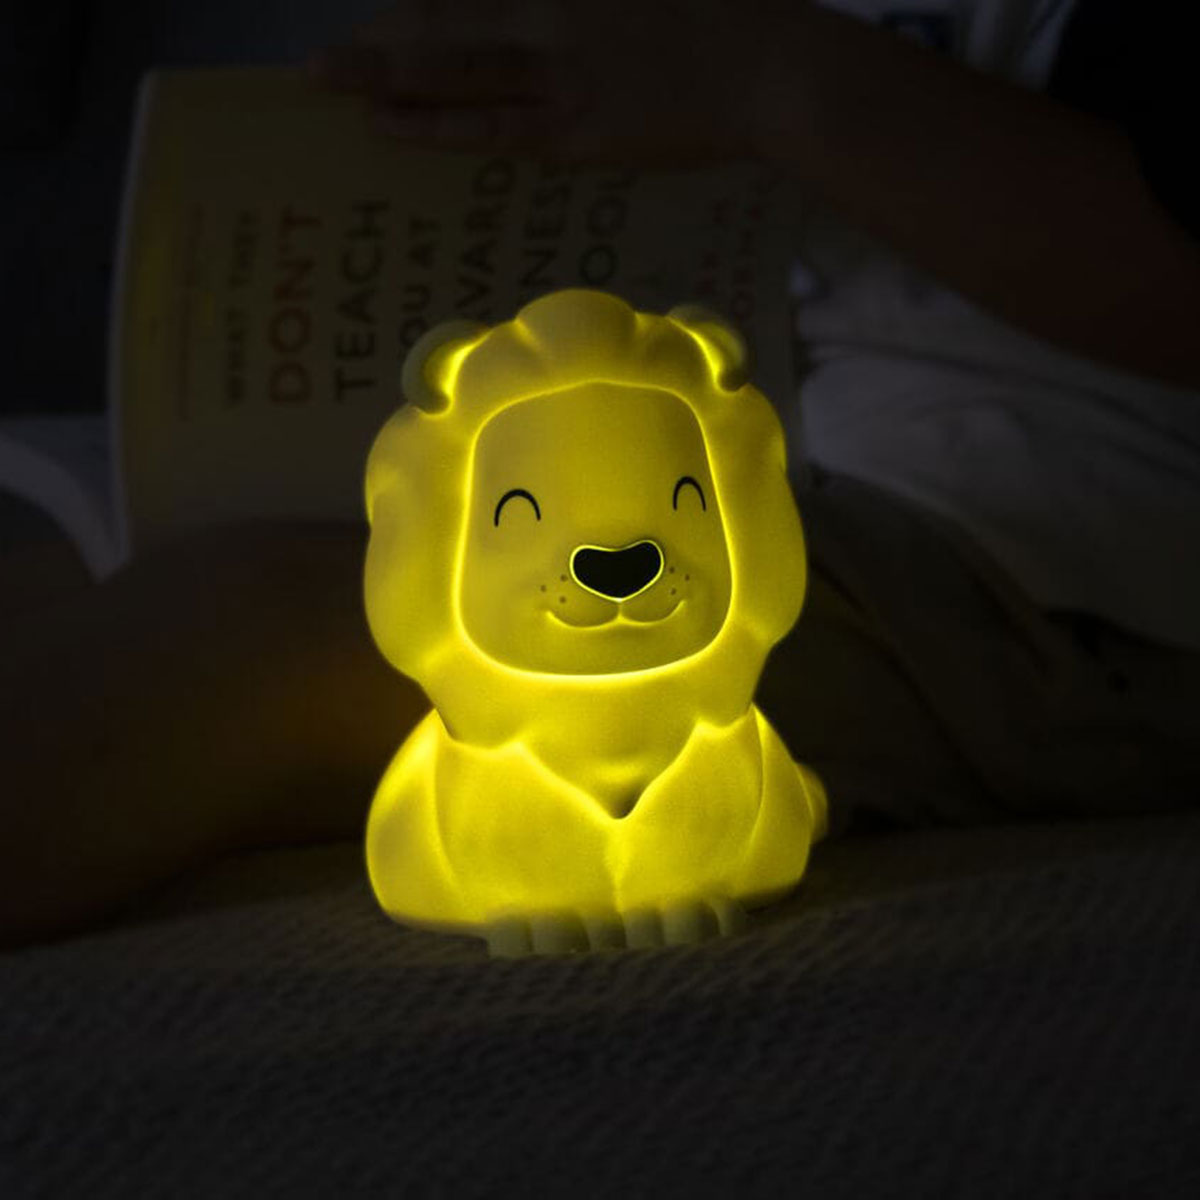 Soft rechargeable silicone night light - Lion